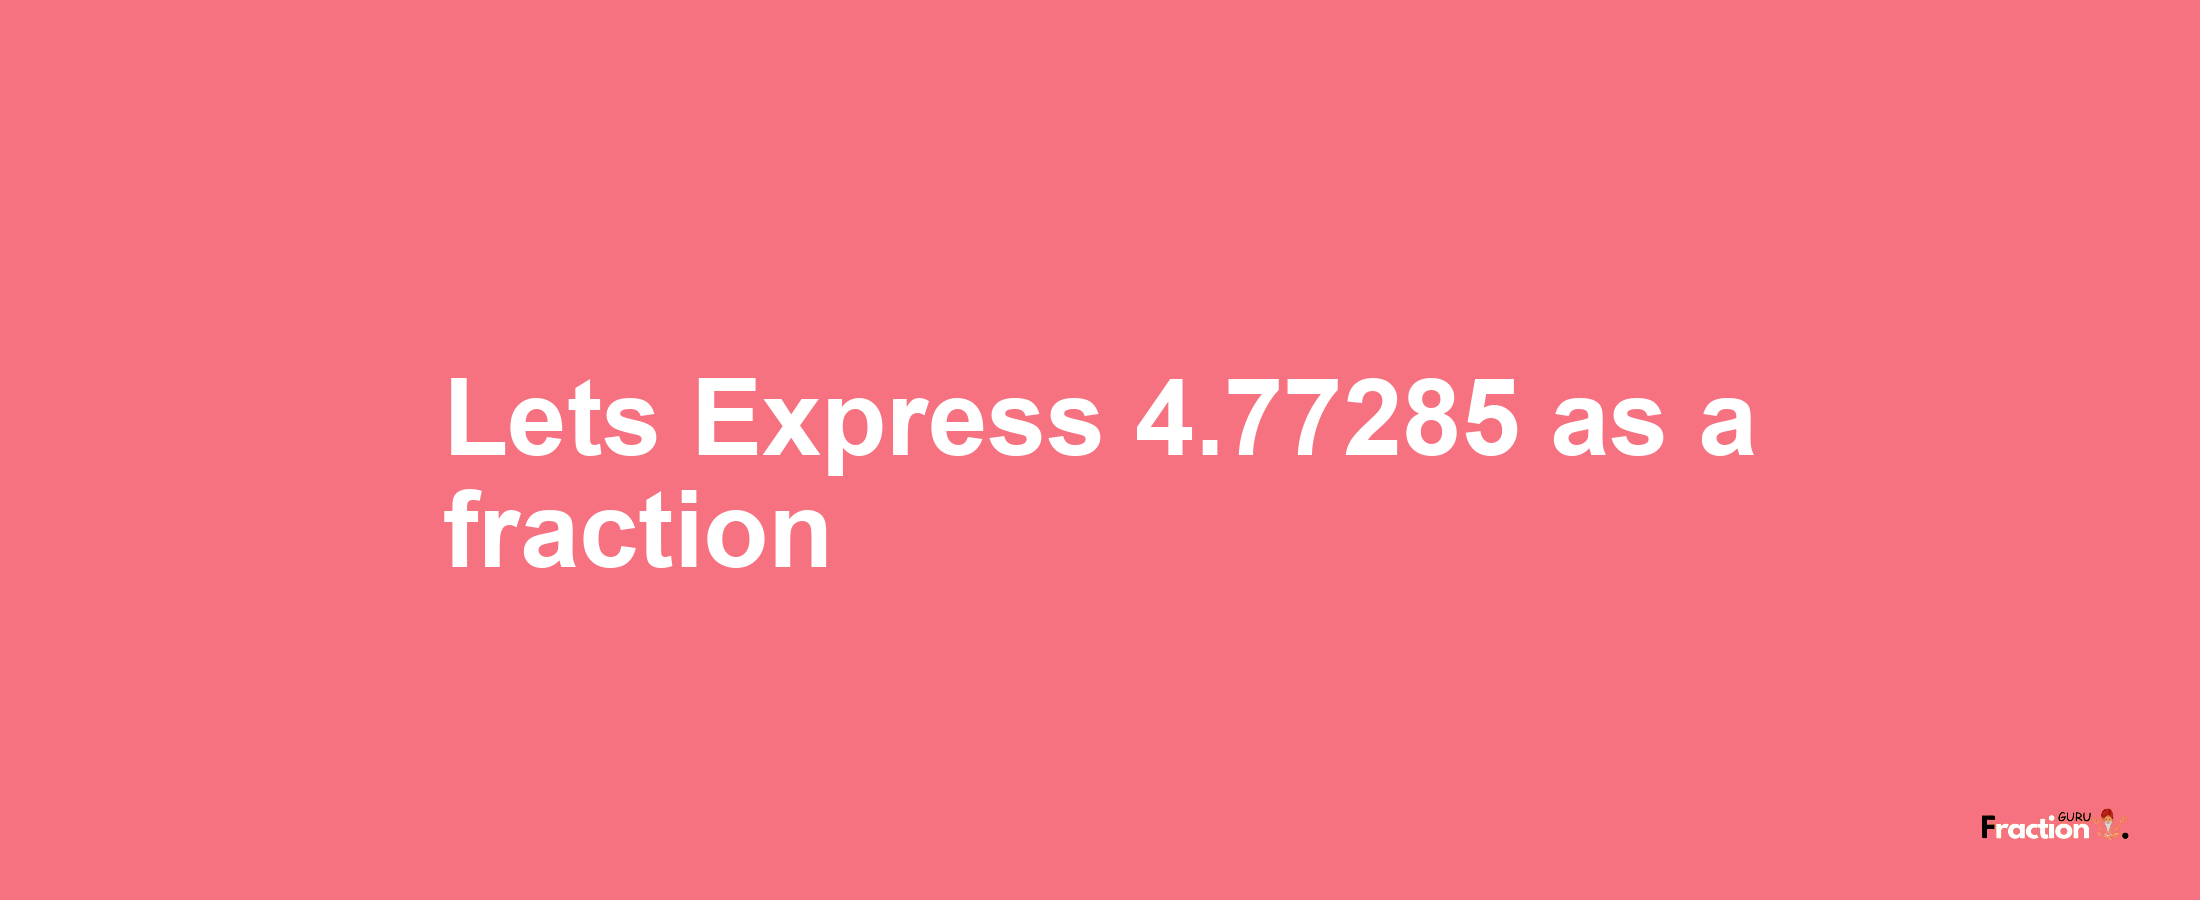 Lets Express 4.77285 as afraction